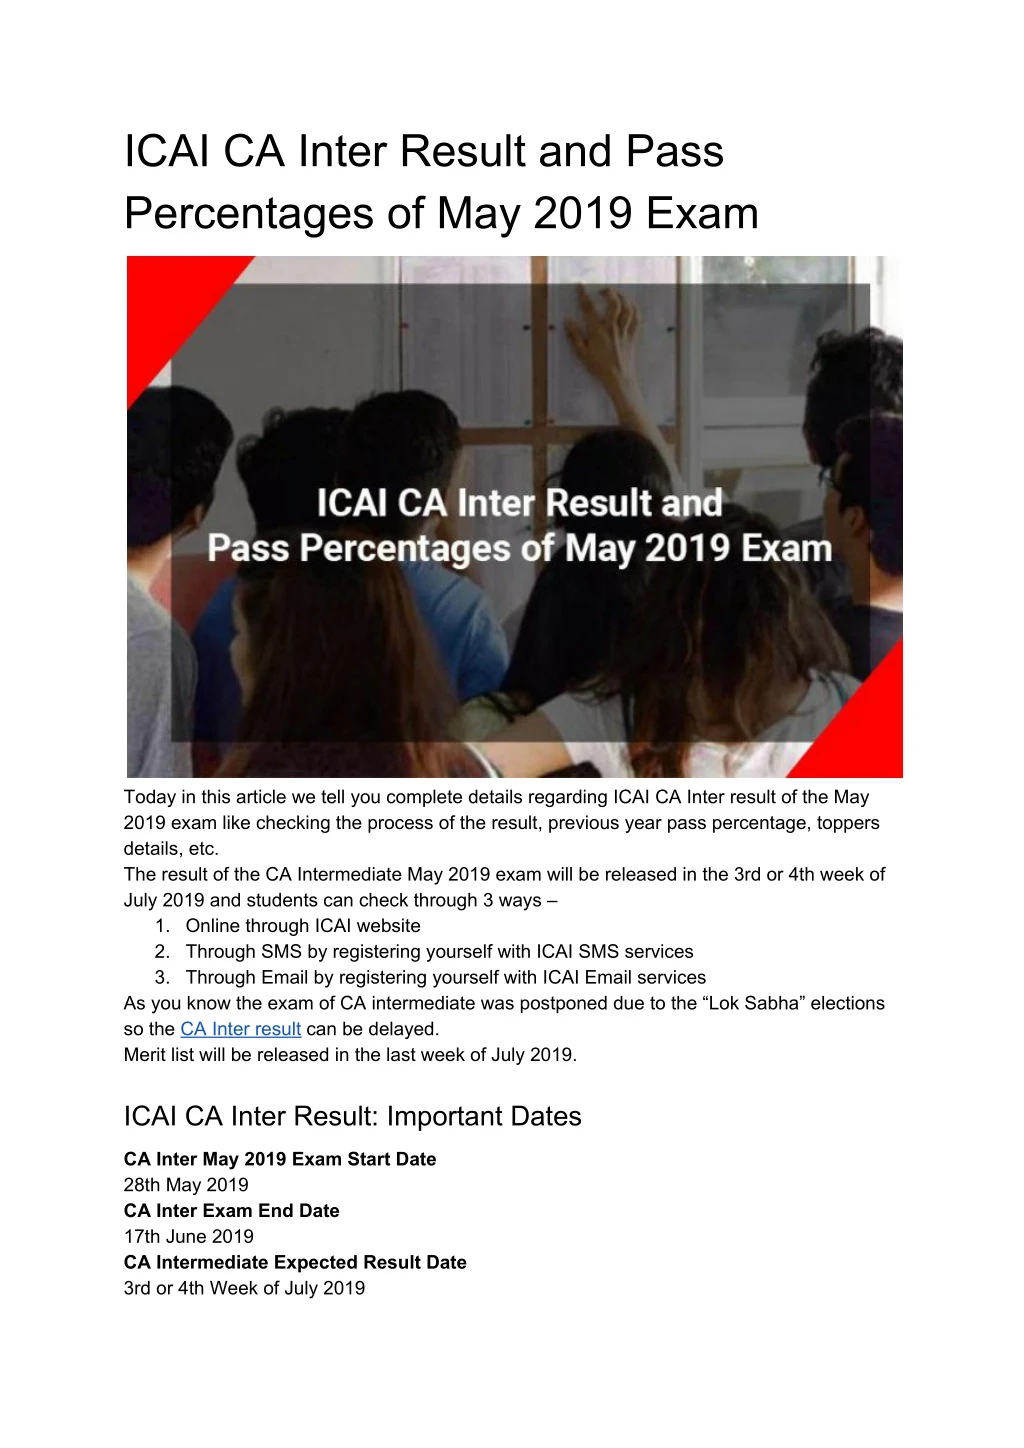 icai ca inter result and pass percentages